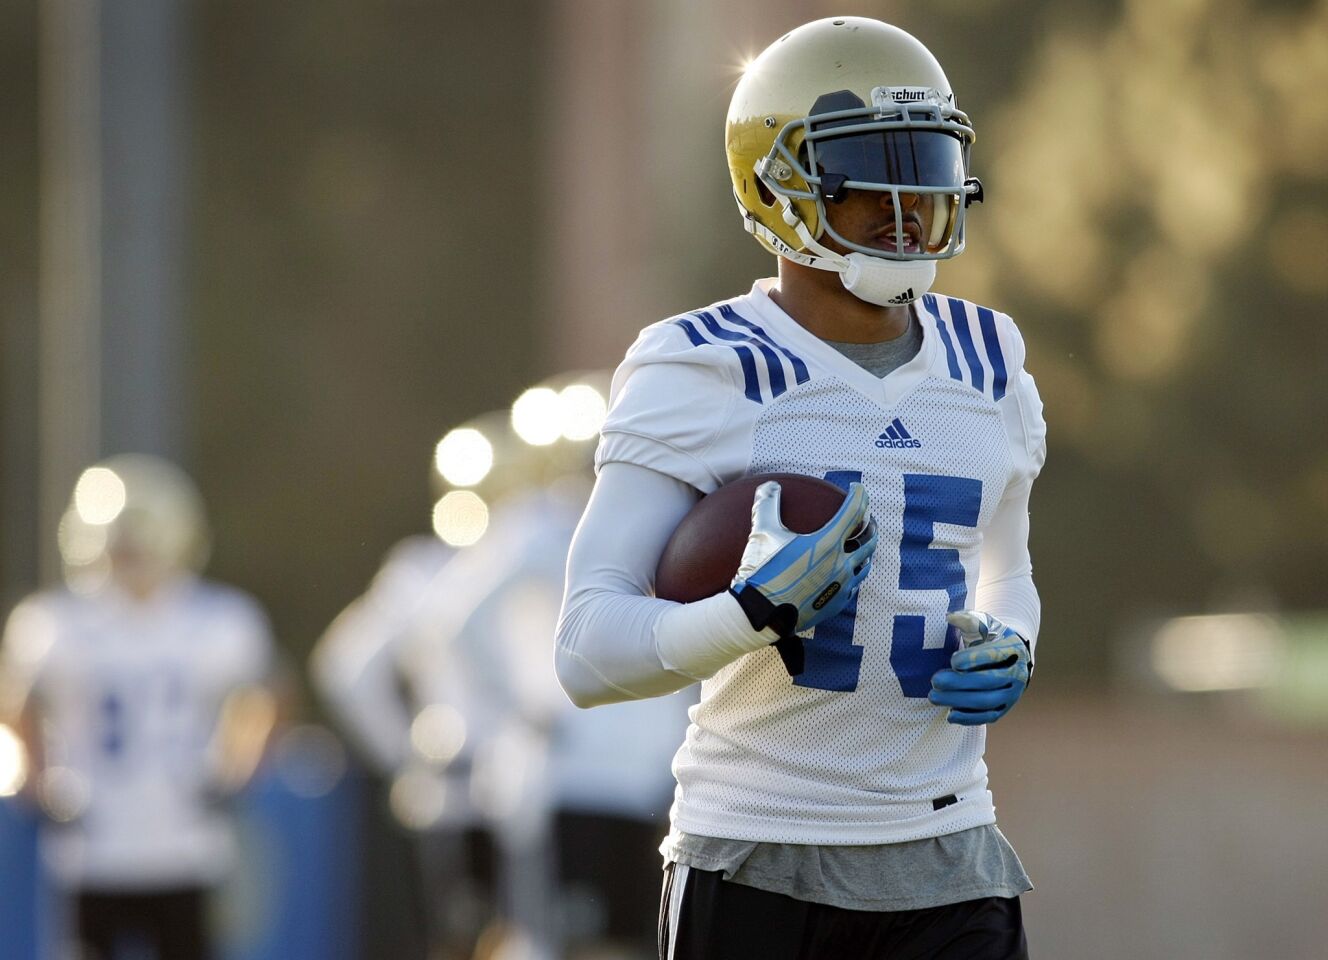 UCLA wide receiver Devin Lucien catches passes Tuesday morning during the Bruins' first spring practice.